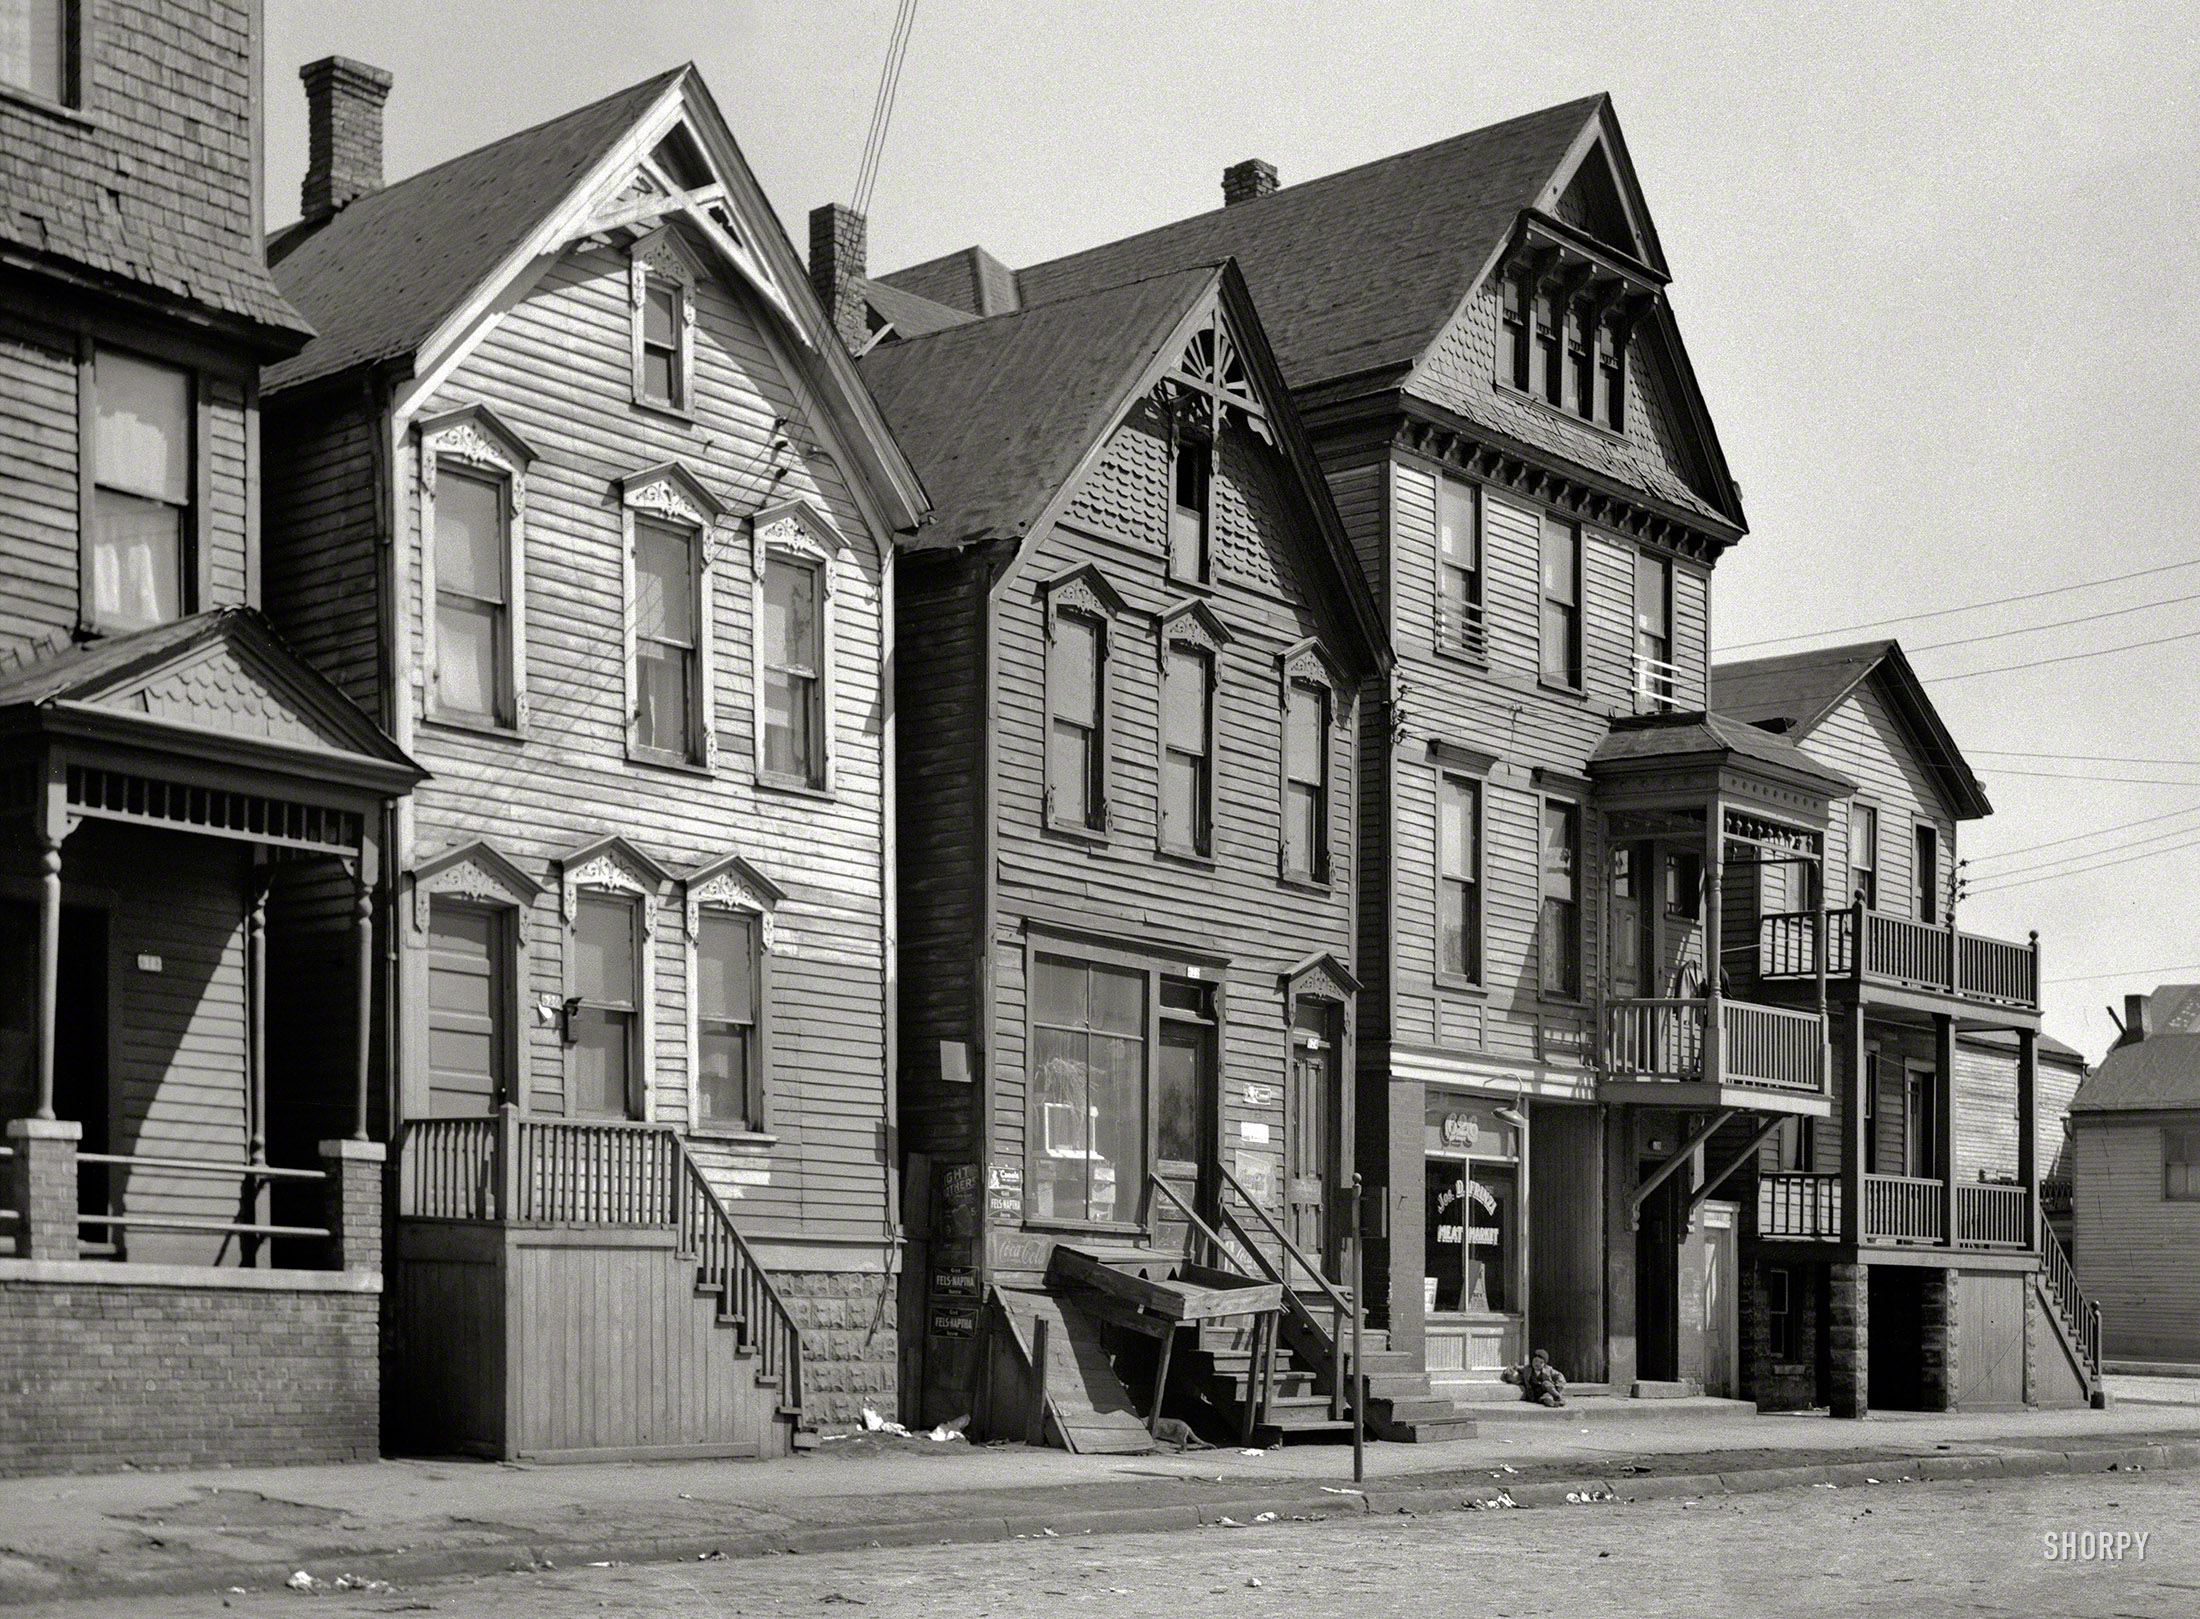 April 1936. "Group of houses in 600 block on East Detroit Street. Milwaukee, Wisconsin." Plus: One kid, one cat and the Joseph D. Frinzi meat market. Photo by Carl Mydans for the Resettlement Administration. View full size.